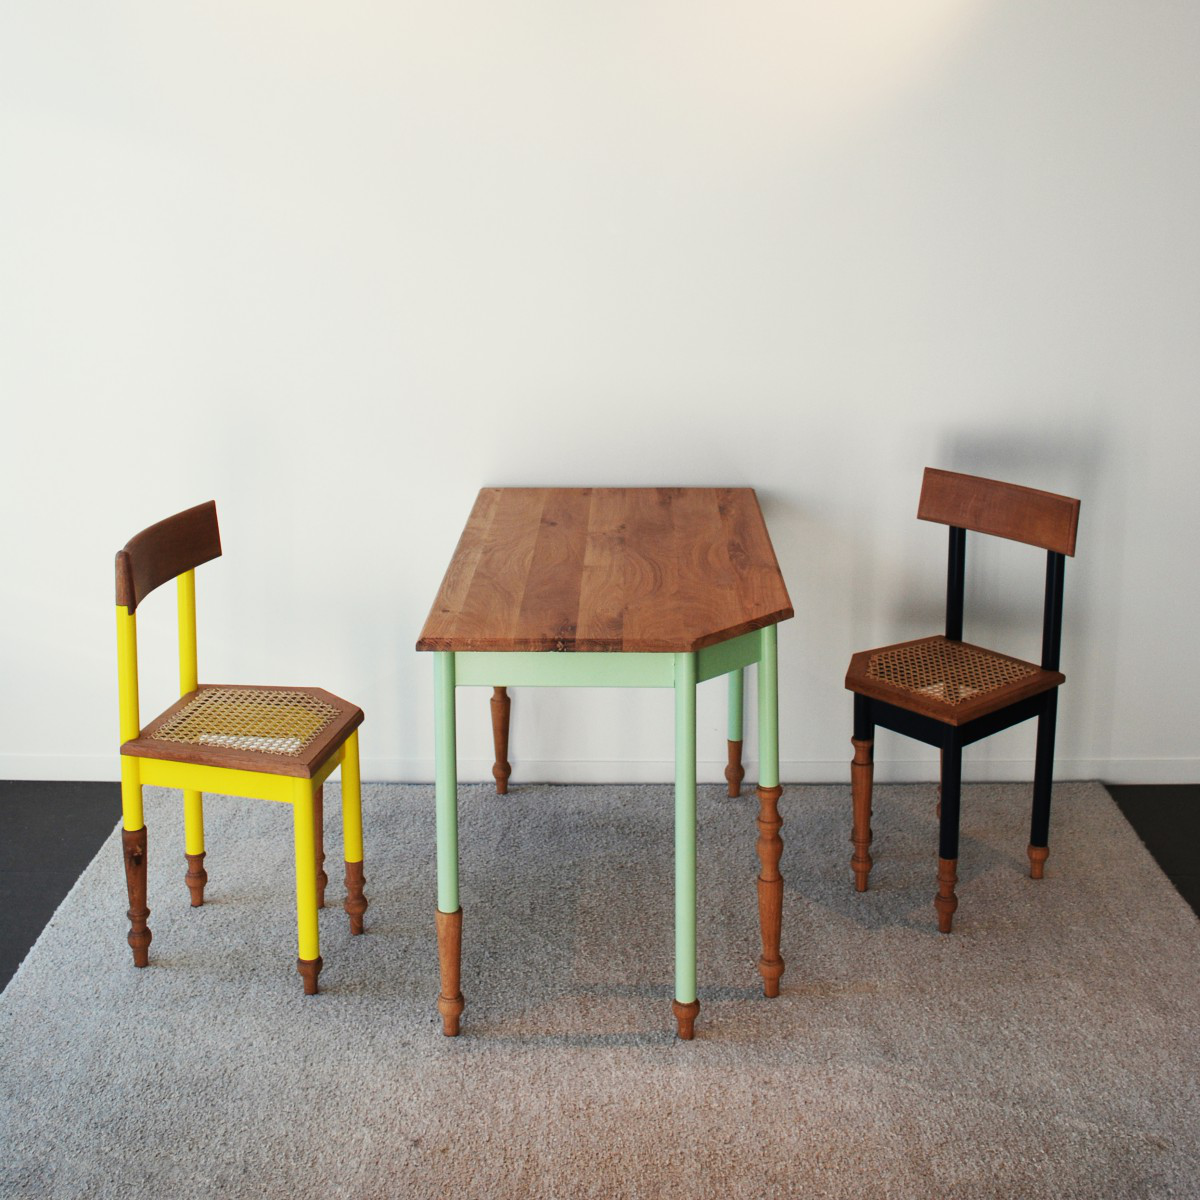 Hoek af table, chairs by David Hoppenbrouwers